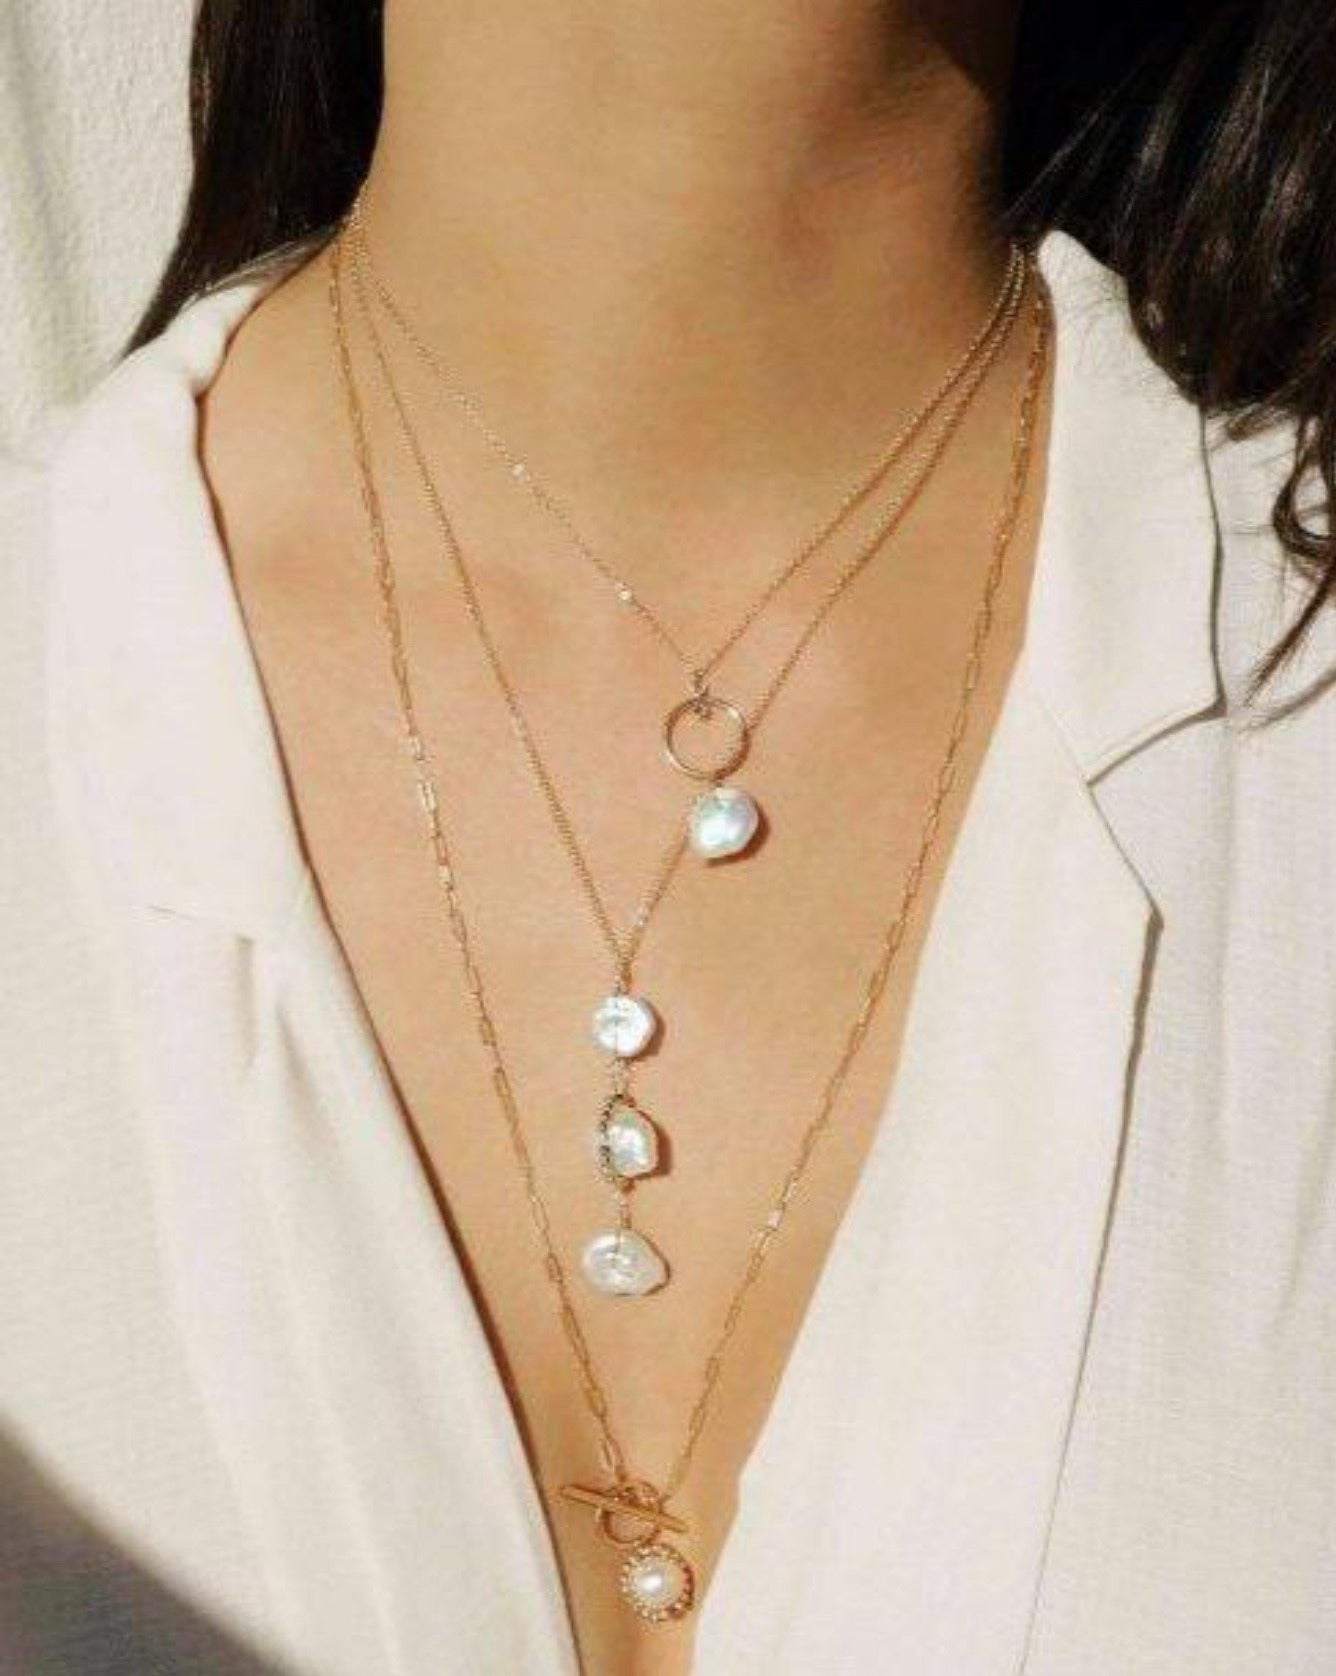 Zaor Necklace by KOZAKH. A 16 to 25 inch adjustable length necklace, crafted in 14K Gold Filled, featuring a 9mm White potato pearl and 2mm Seamless beads.